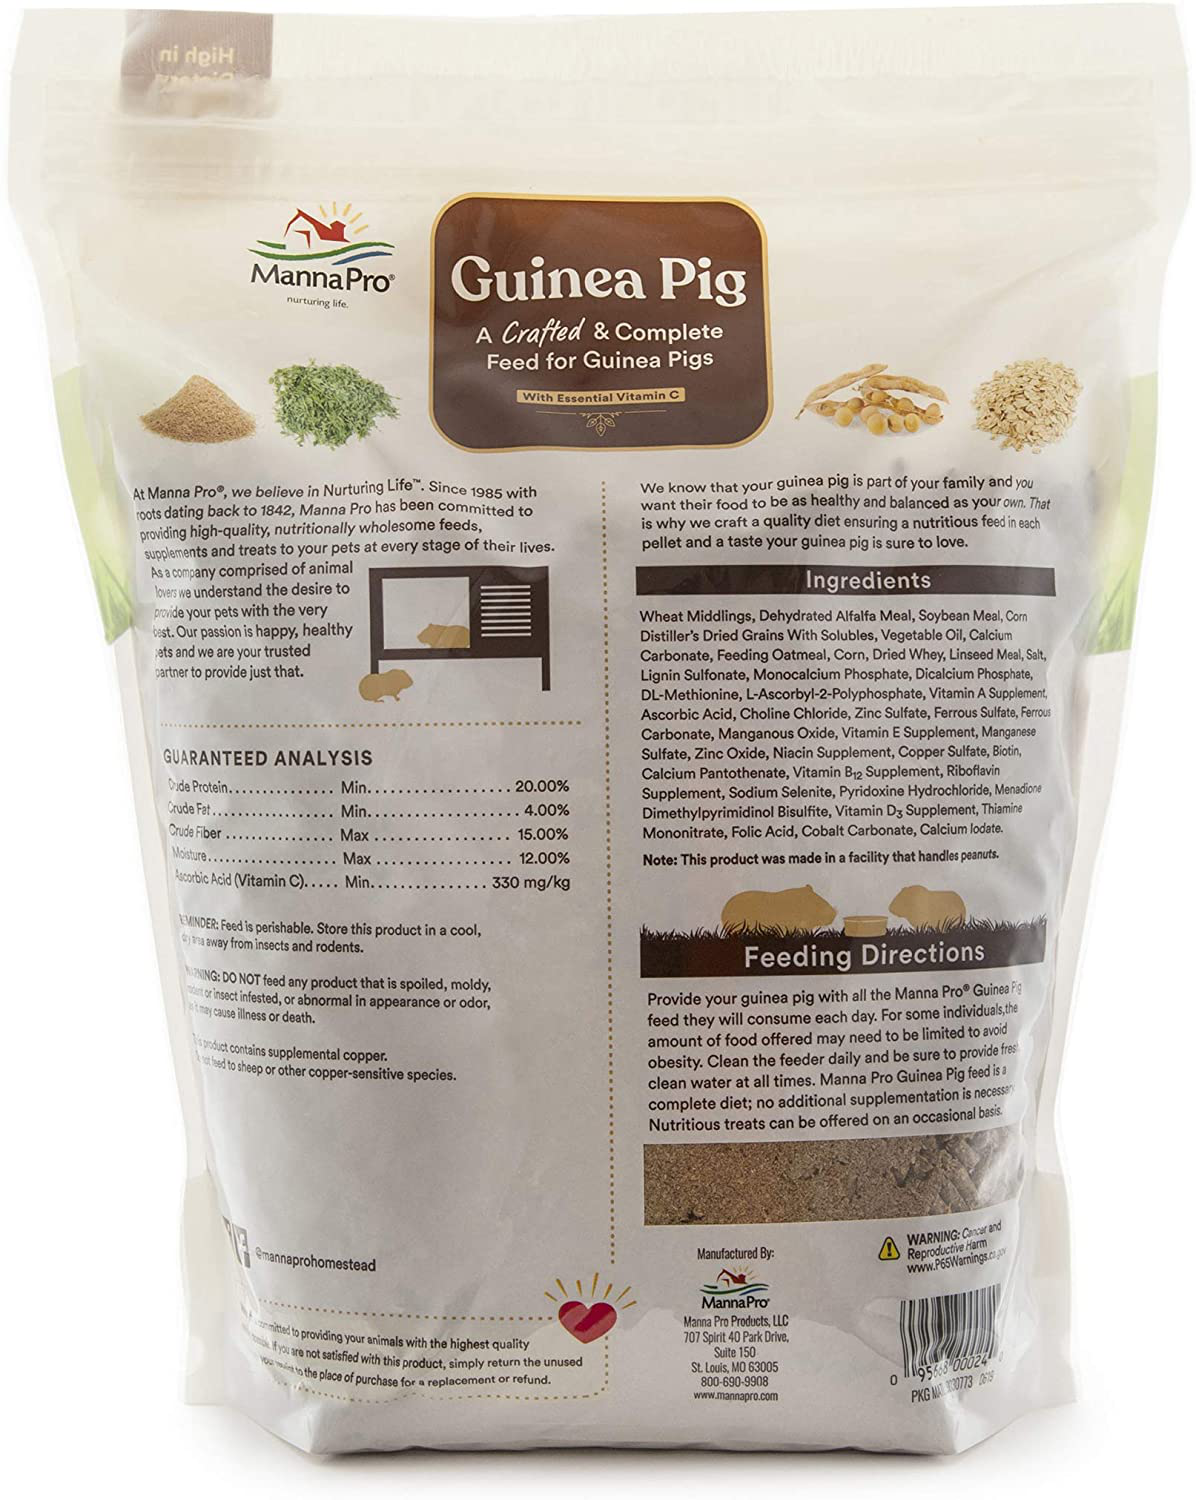 Manna Pro Guinea Pig Feed | with Vitamin C | Complete Feed for Guinea Pigs | No Artificial Colors or Flavors | 5 Lb